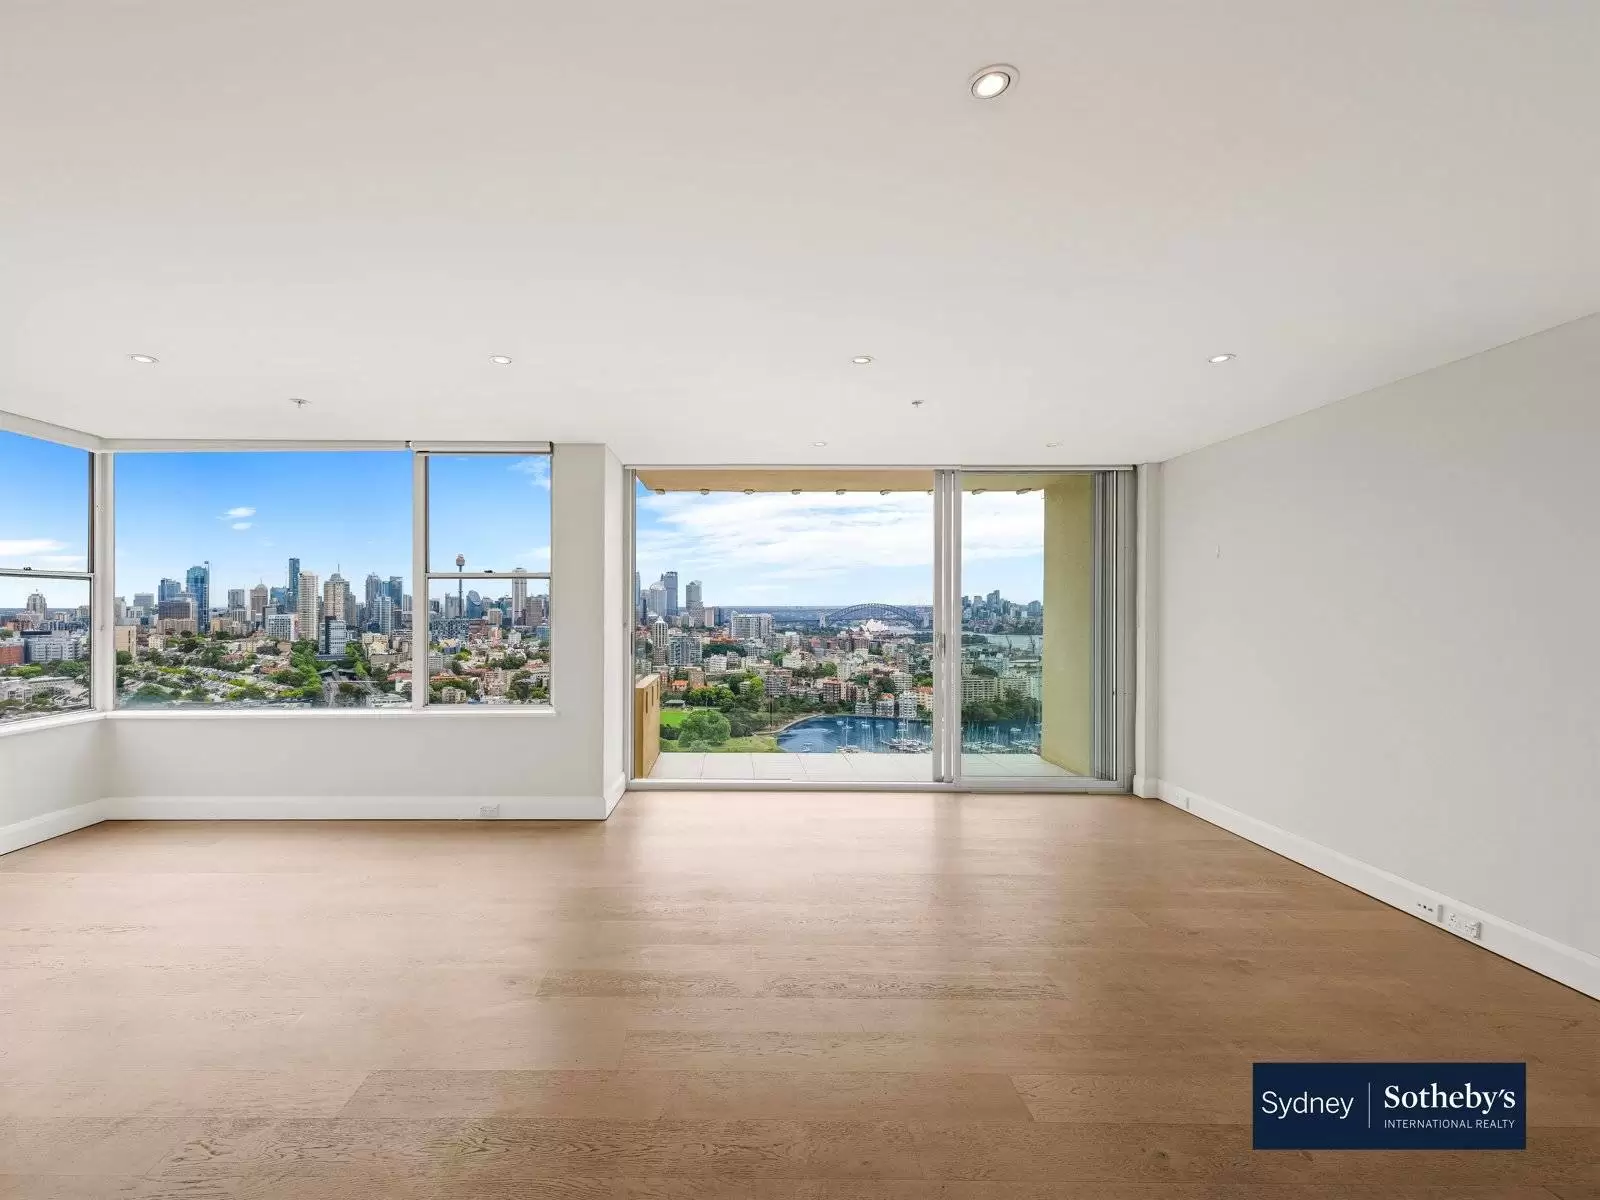 26a/3 Darling Point Road, Darling Point Leased by Sydney Sotheby's International Realty - image 1